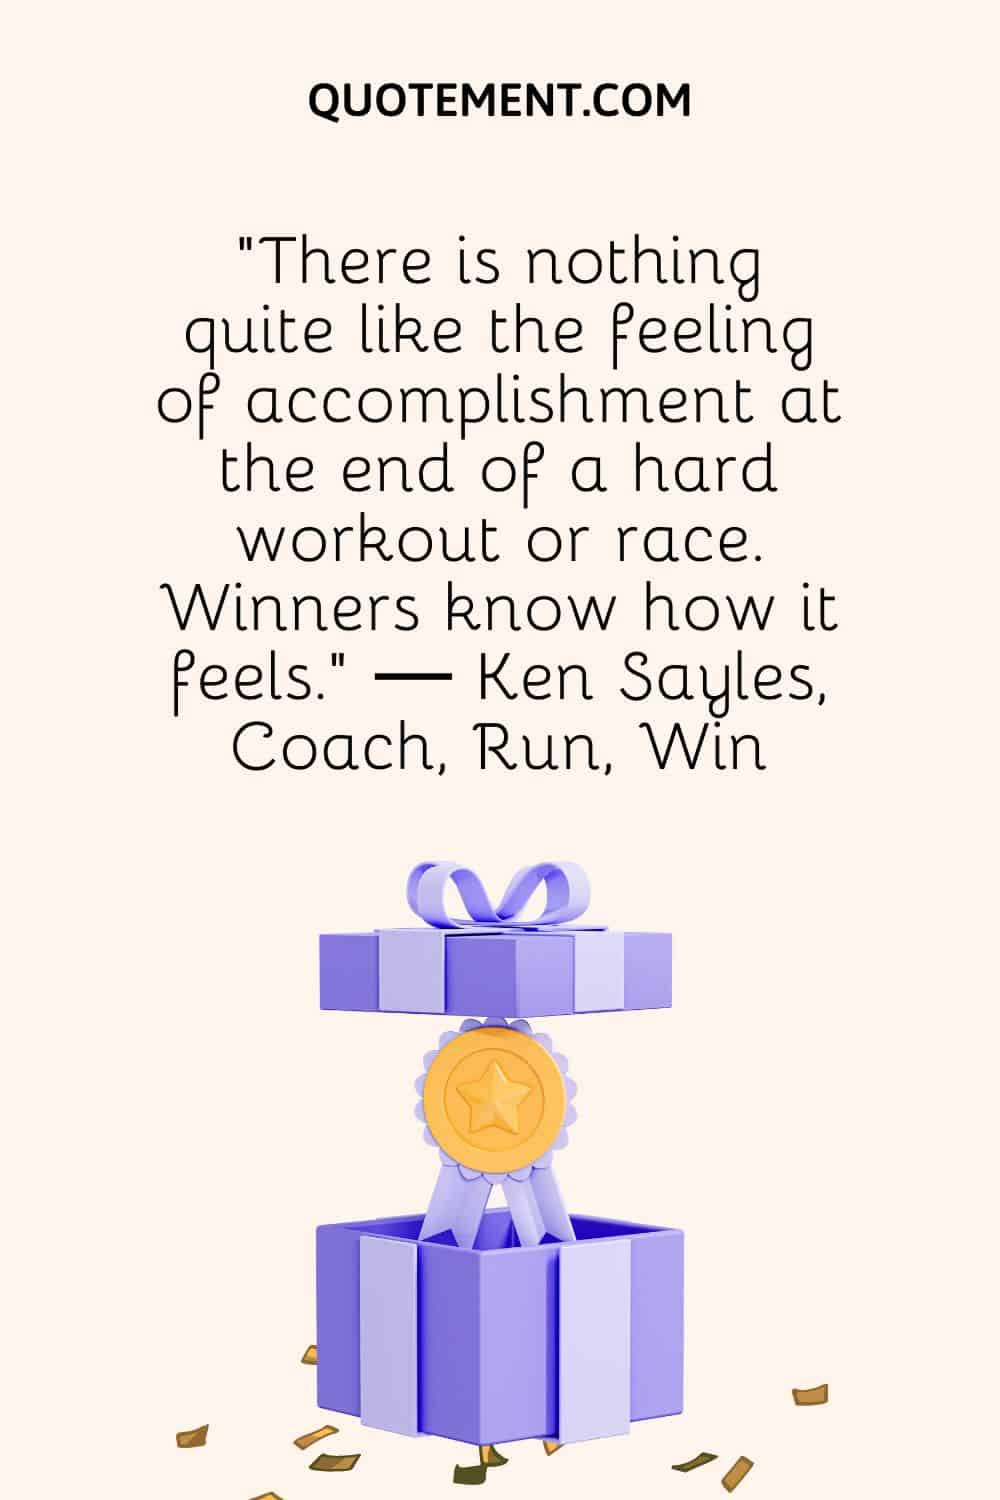 “There is nothing quite like the feeling of accomplishment at the end of a hard workout or race. Winners know how it feels.” ― Ken Sayles, Coach, Run, Win